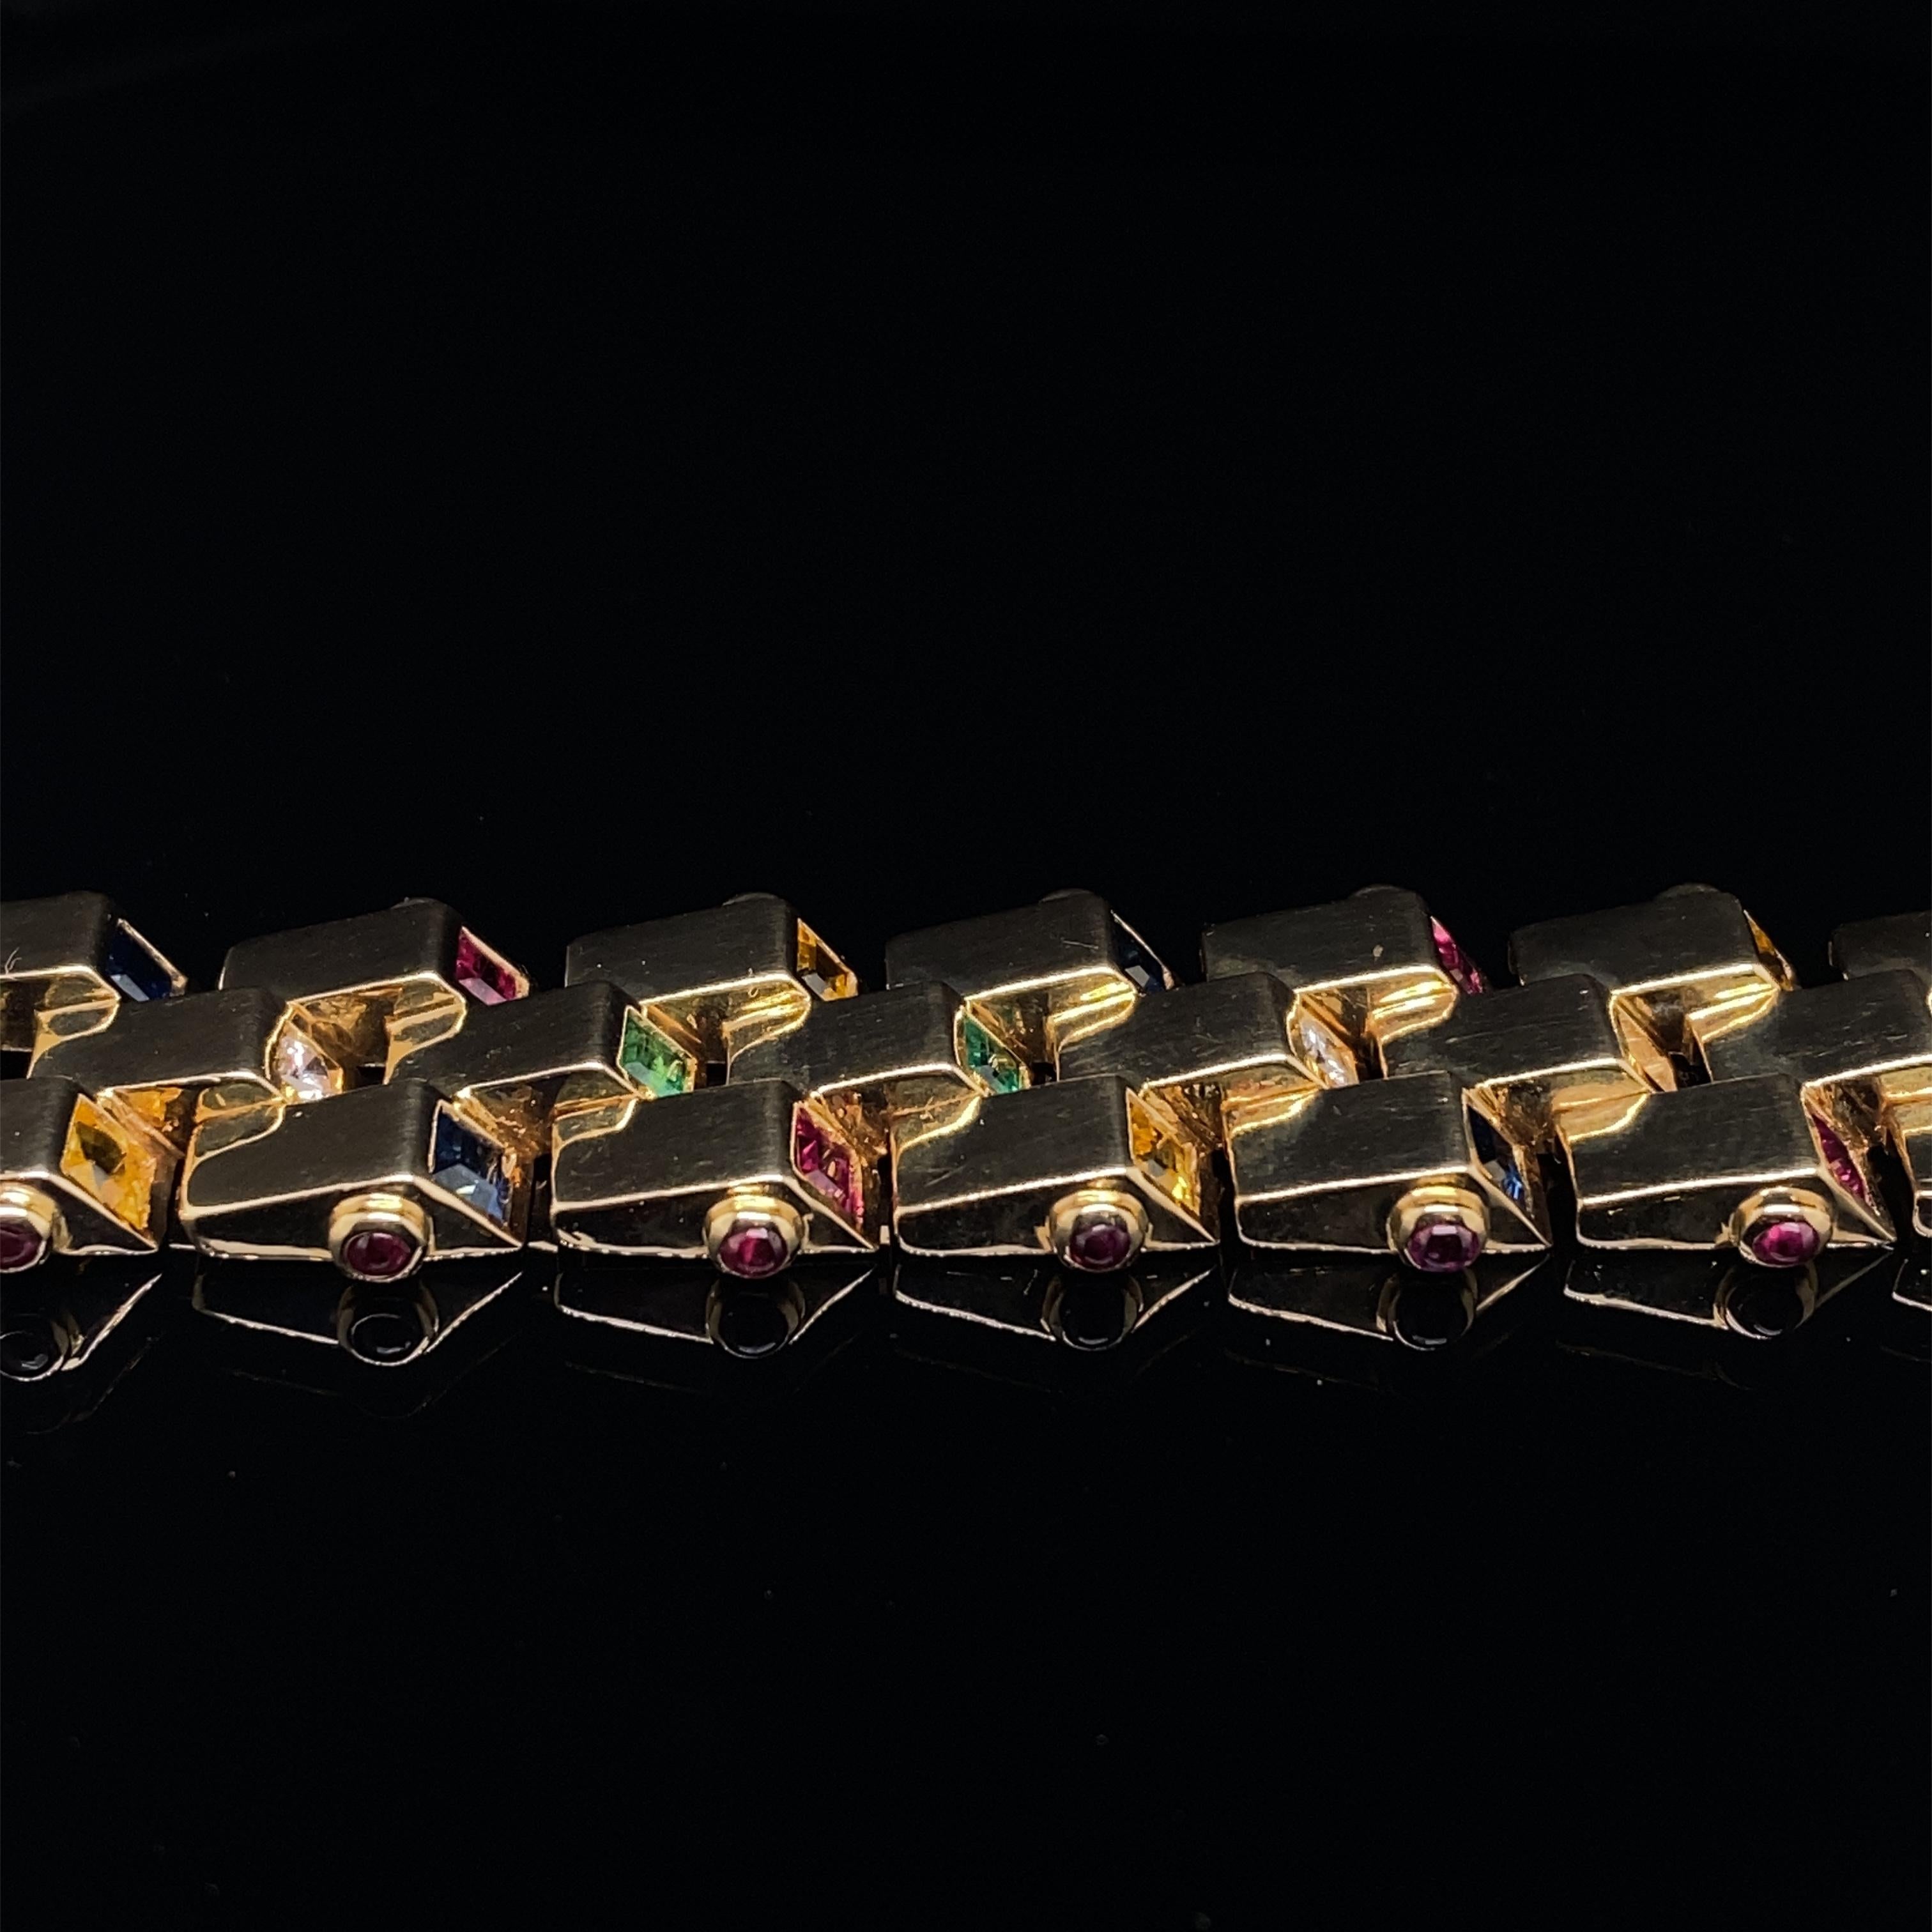 An exceptional vintage 18 karat yellow gold bracelet, set with square cut diamonds, sapphires, emeralds, rubies and citrines, circa 1960.

This bold and playful piece is comprised of three angular 18 karat yellow gold rows, each linked section